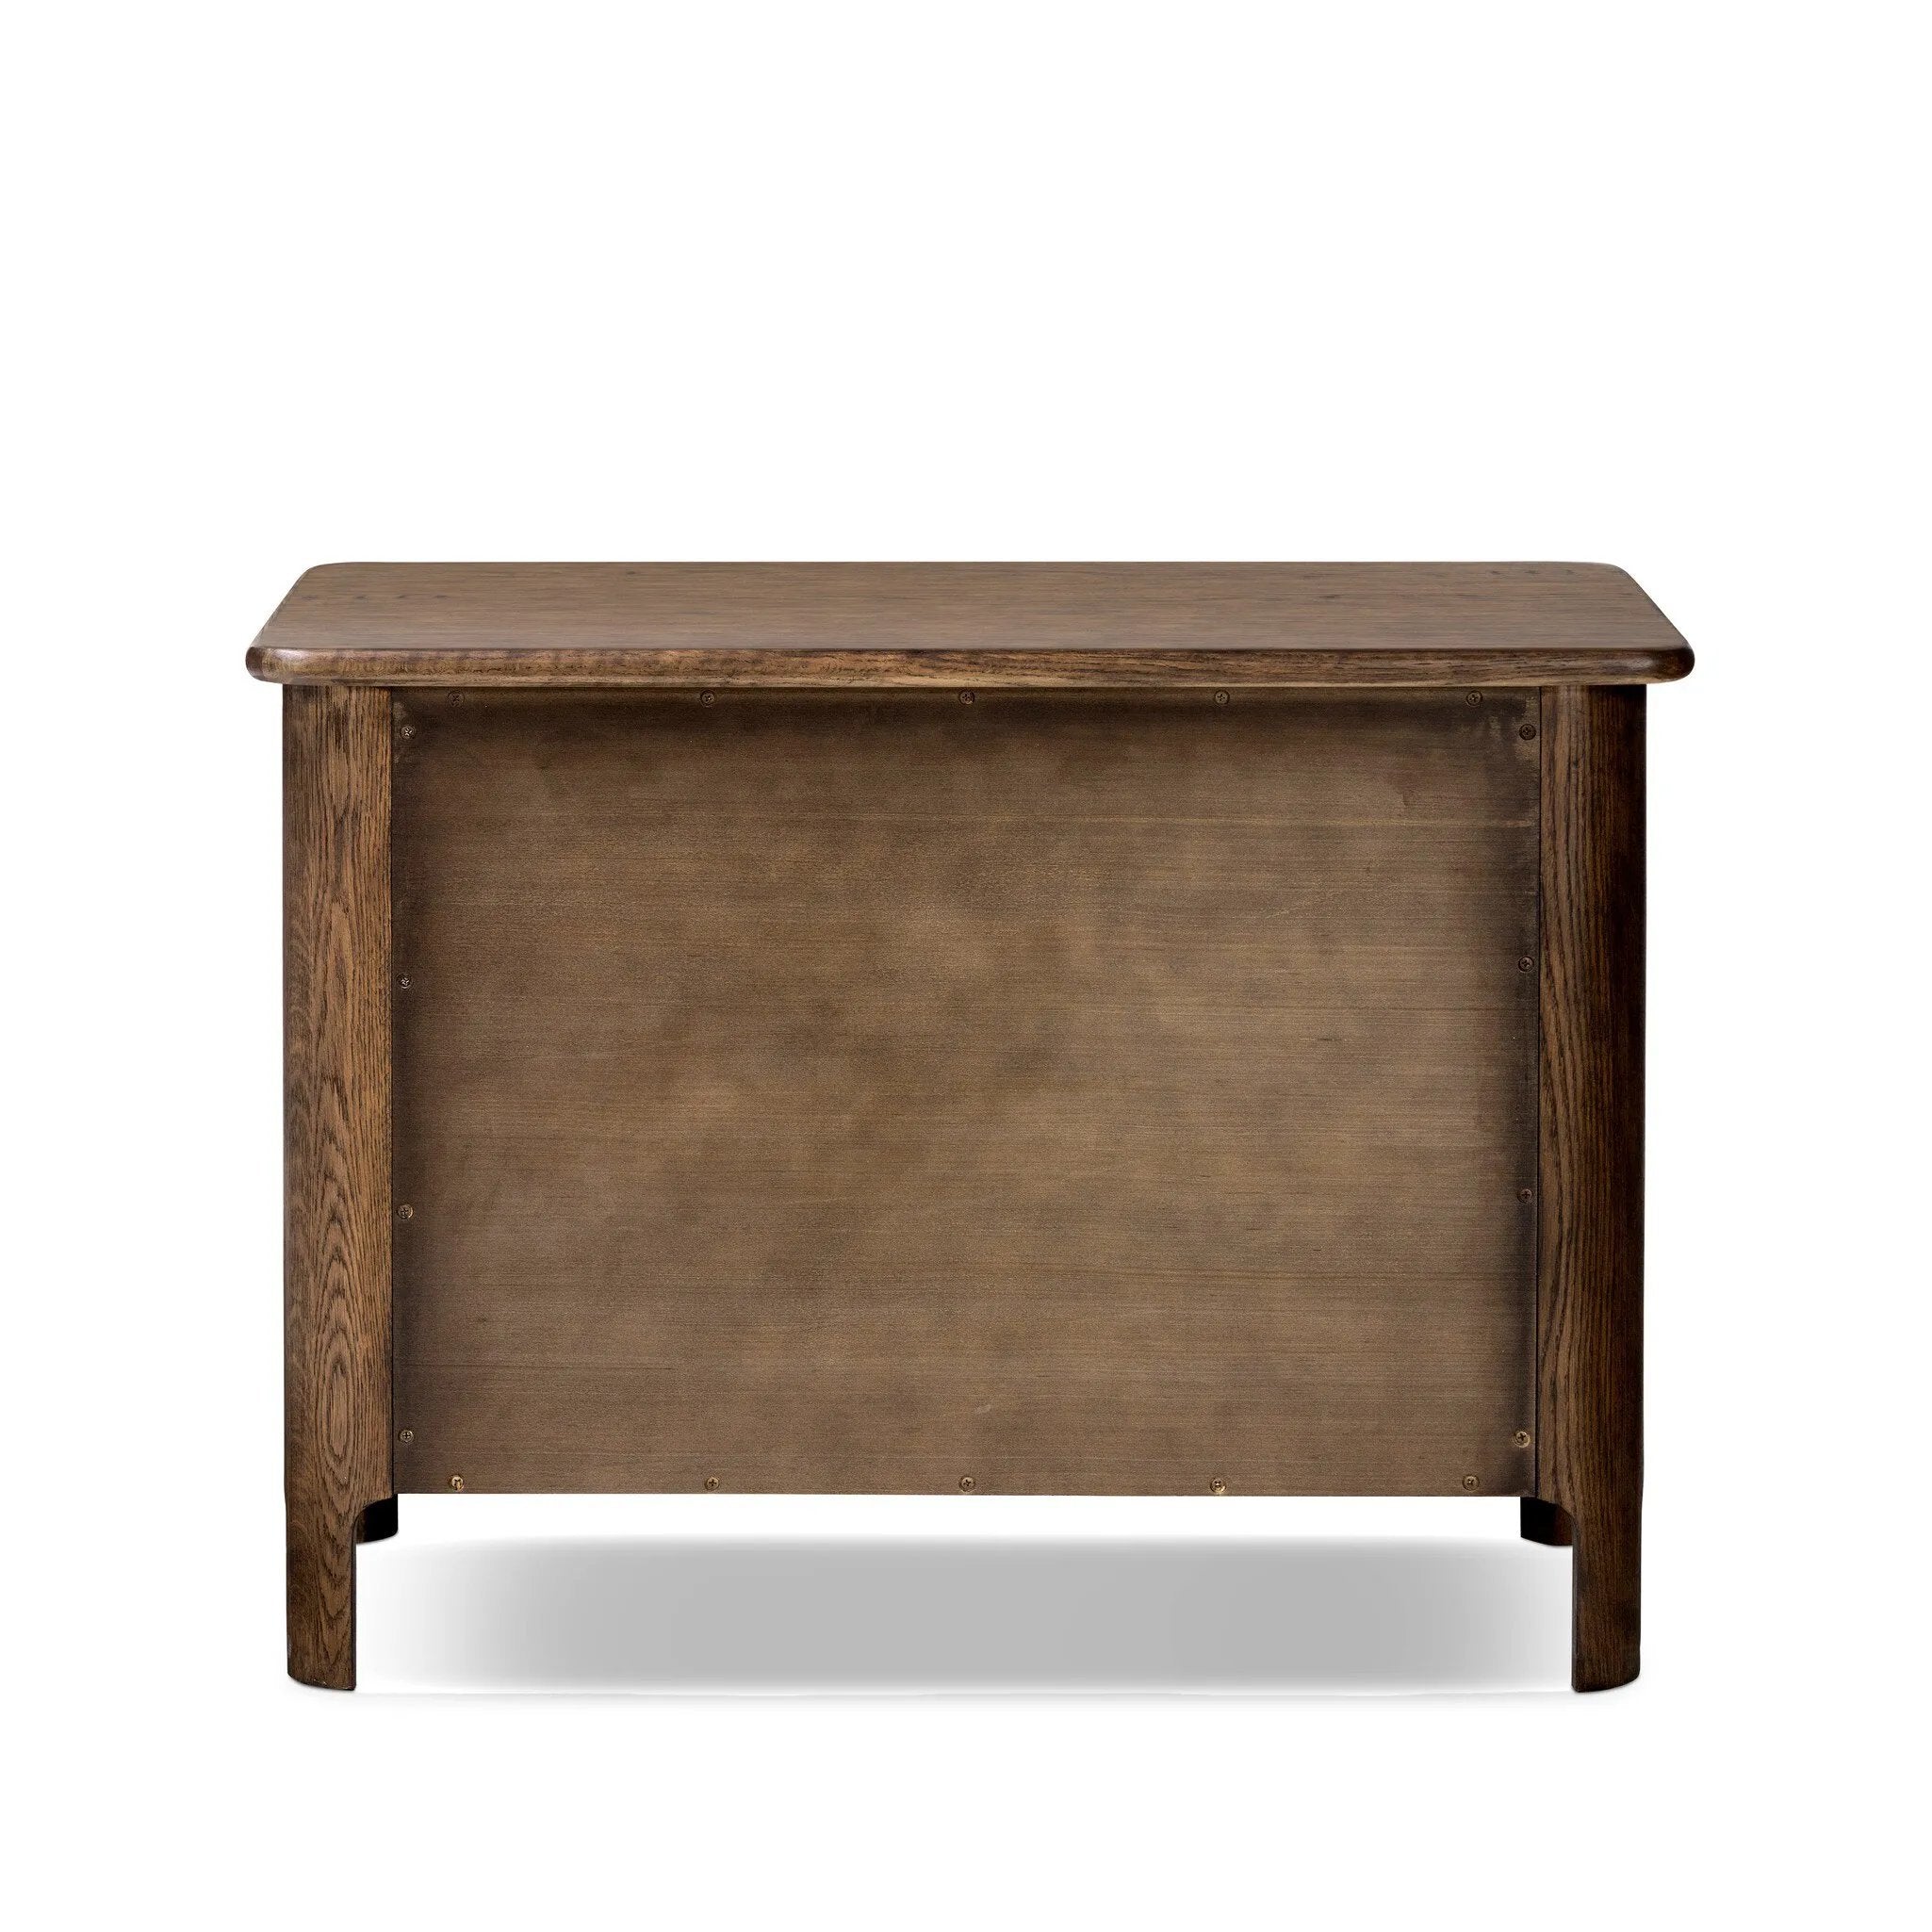 Like an heirloom nightstand with two roomy drawers, this aged oak design has room for it all. Detailed with an overhang surface, carved edges top to bottom, angled legs and oval drawer pulls finished in dark gunmetal.Collection: Bolto Amethyst Home provides interior design, new home construction design consulting, vintage area rugs, and lighting in the Los Angeles metro area.